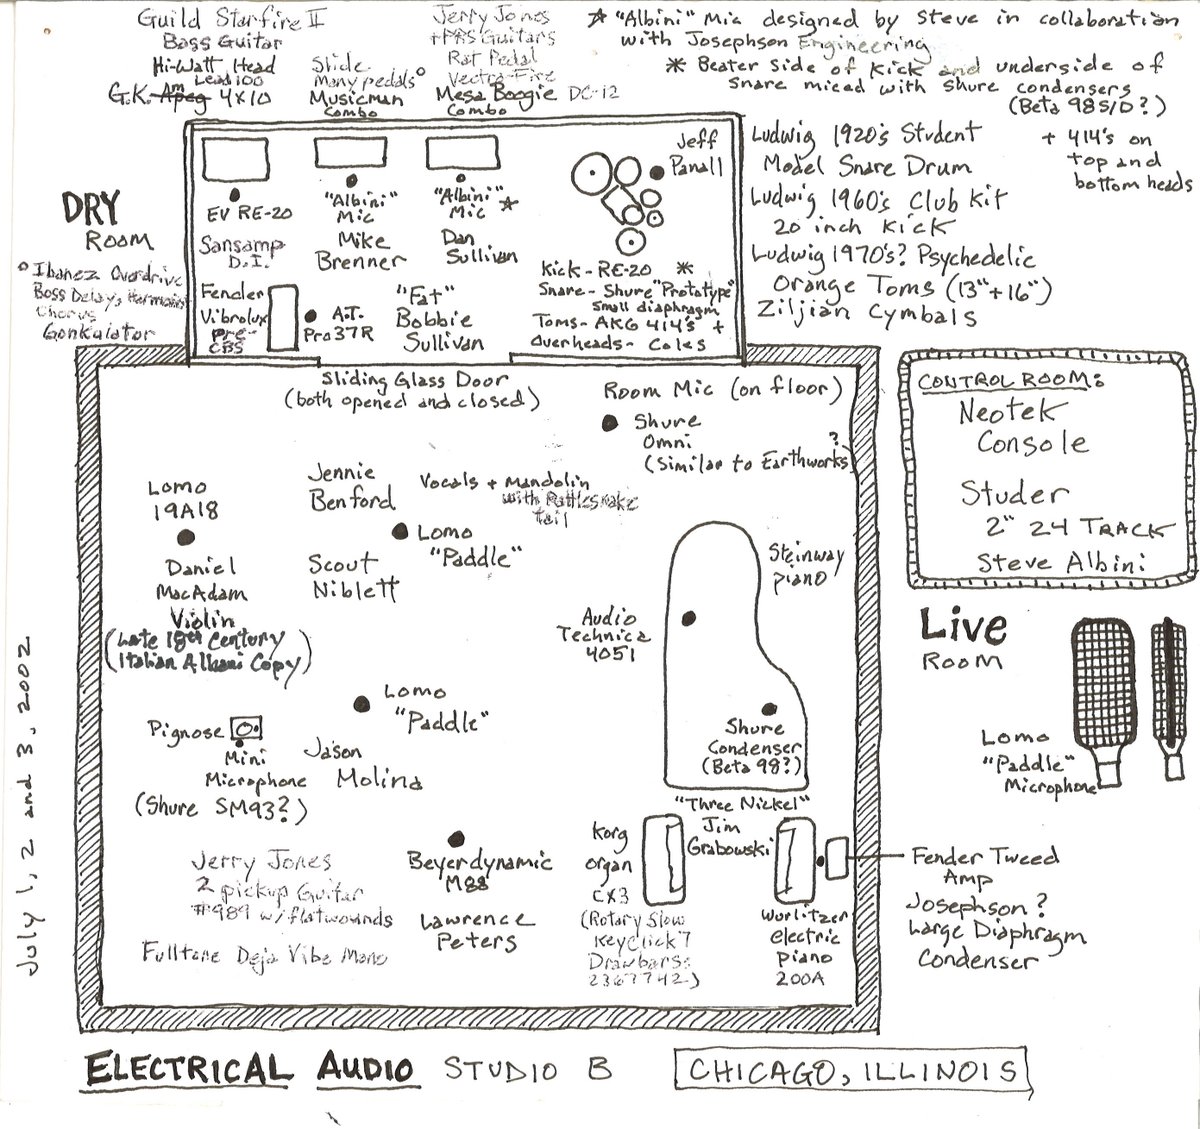 RIP to Steve Albini, a wizard who would hate being called a wizard, but who surely made magic. Here's the Electric Audio layout for 'Magnolia Electric Co', just sketched out simply, on paper, like it's not poised to shift time and space and all our hearts.